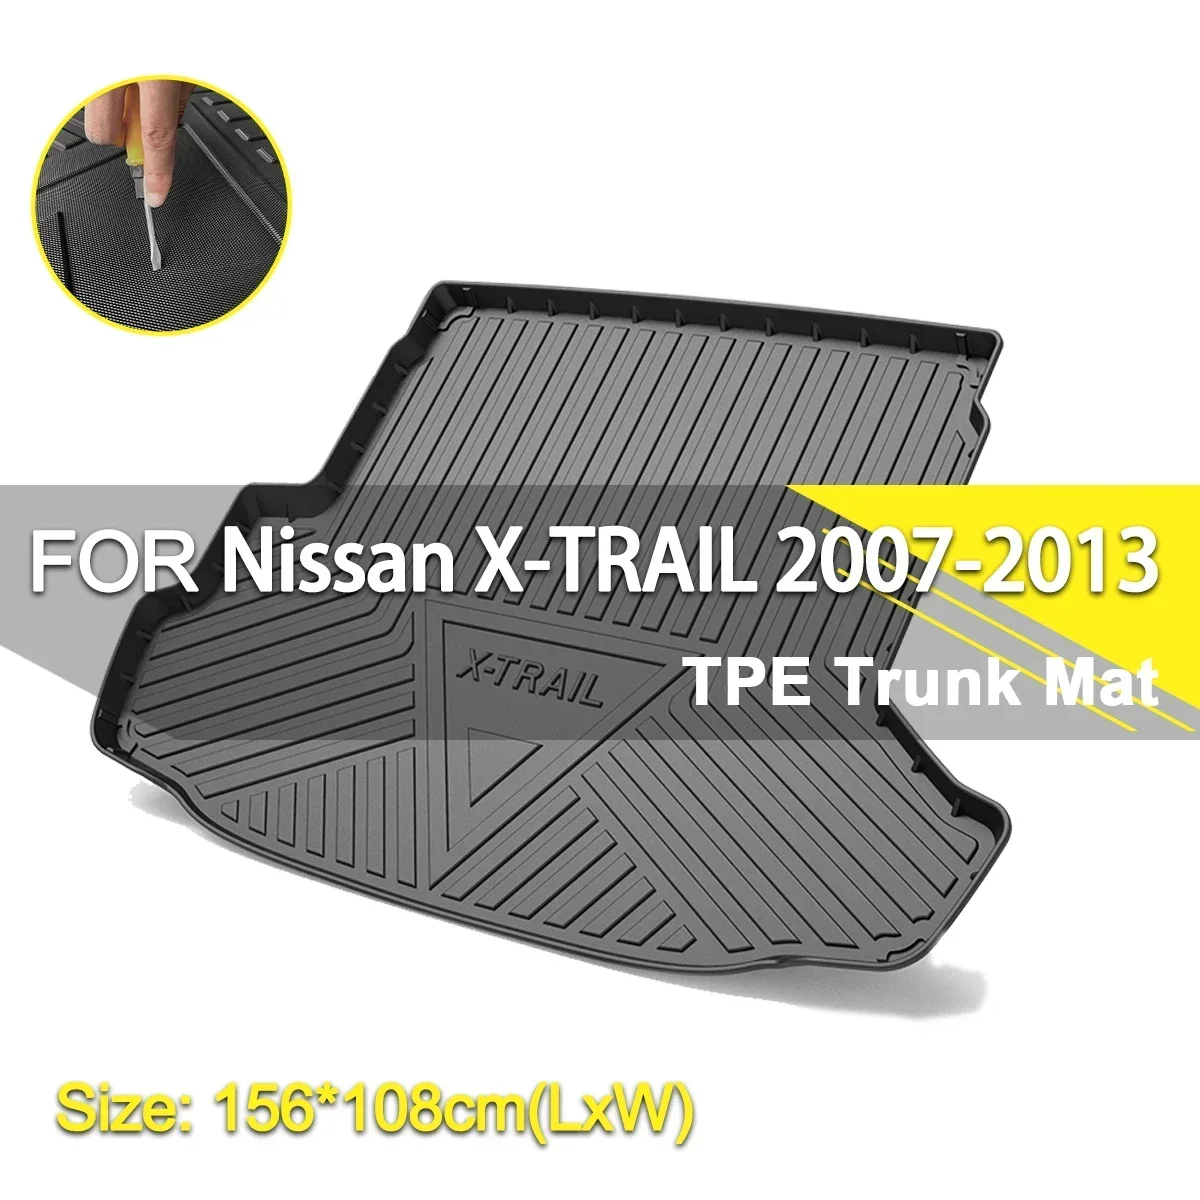 Car Rear Trunk Cover Mat Non-Slip Waterproof Rubber TPE Cargo Liner Accessories For Nissan X-TRAIL 2007-2013 5/7 Seater